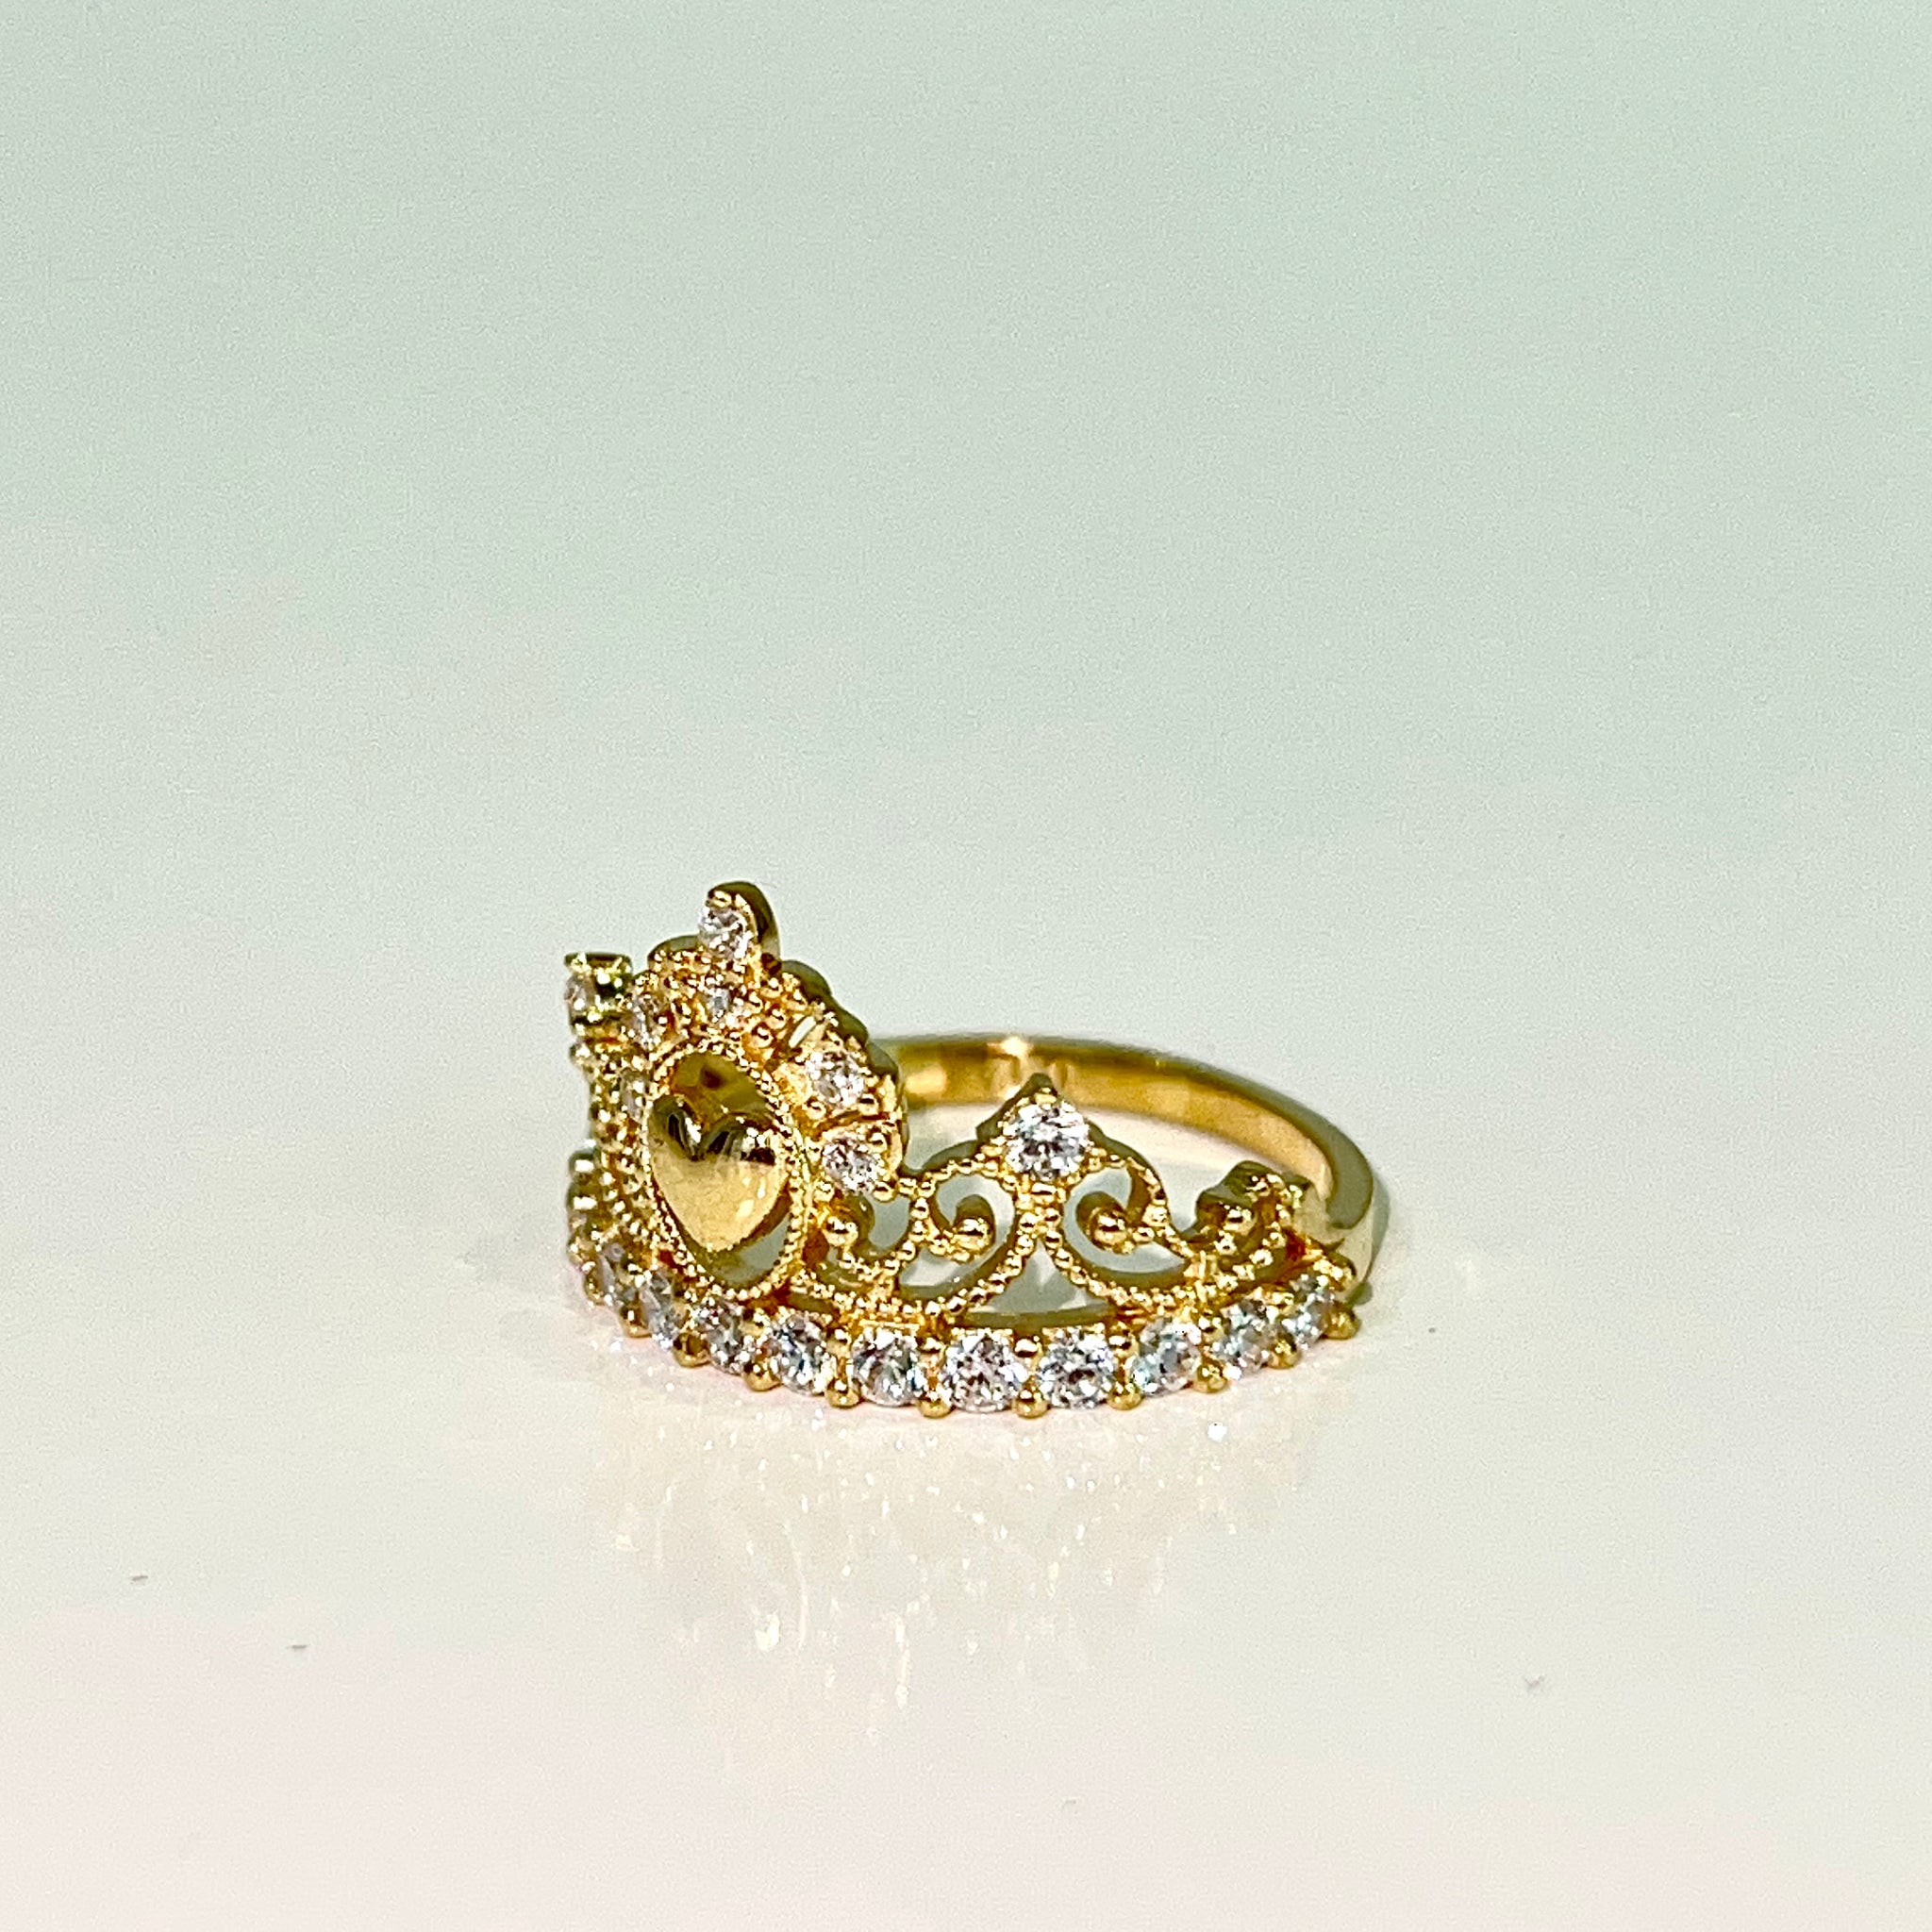 Deluxe Crown Ladies Ring "Iced Out"  - 18 carat gold